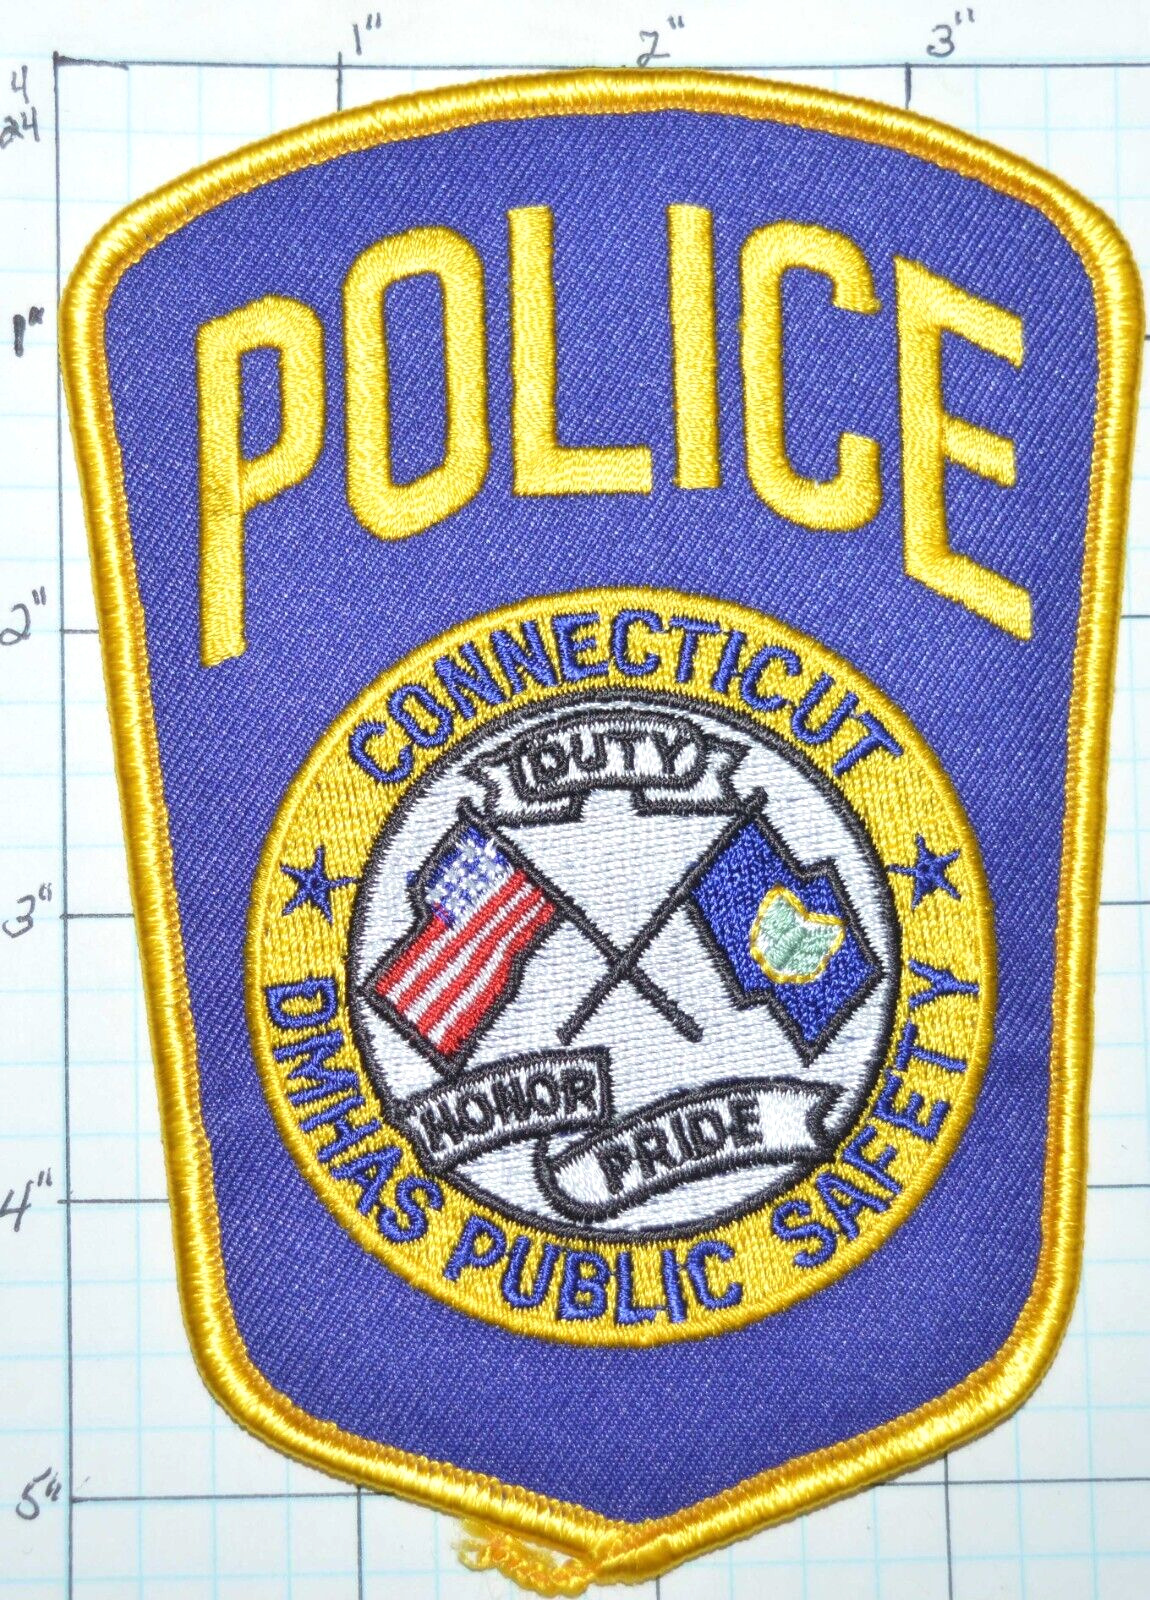 CONNECTICUT DEPT OF MENTAL HEALTH DMHAS PUBLIC SAFETY POLICE DEPT PATCH